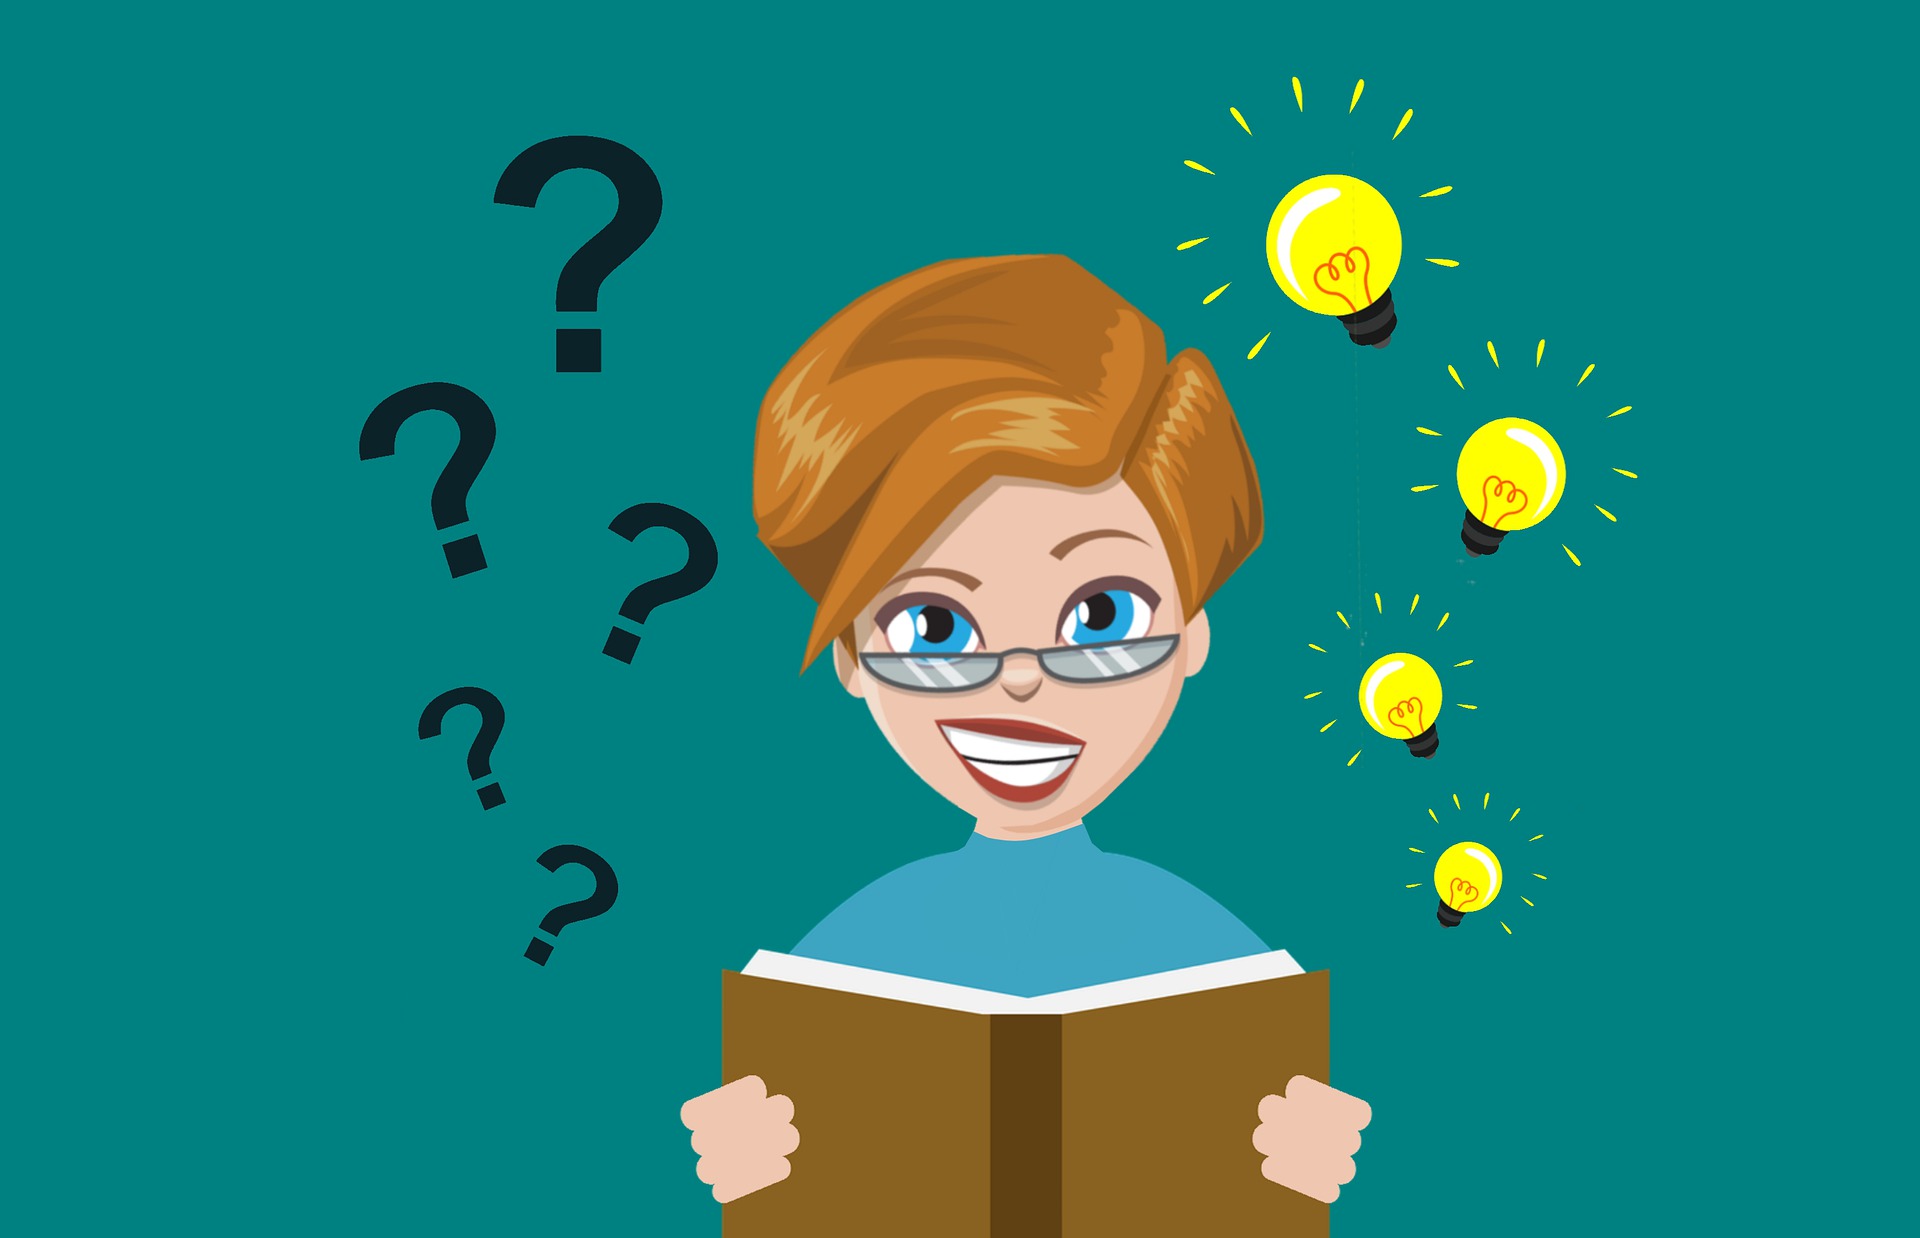 green background with a cartoon image of a woman holding an open book and question marks and light bulbs arouond her